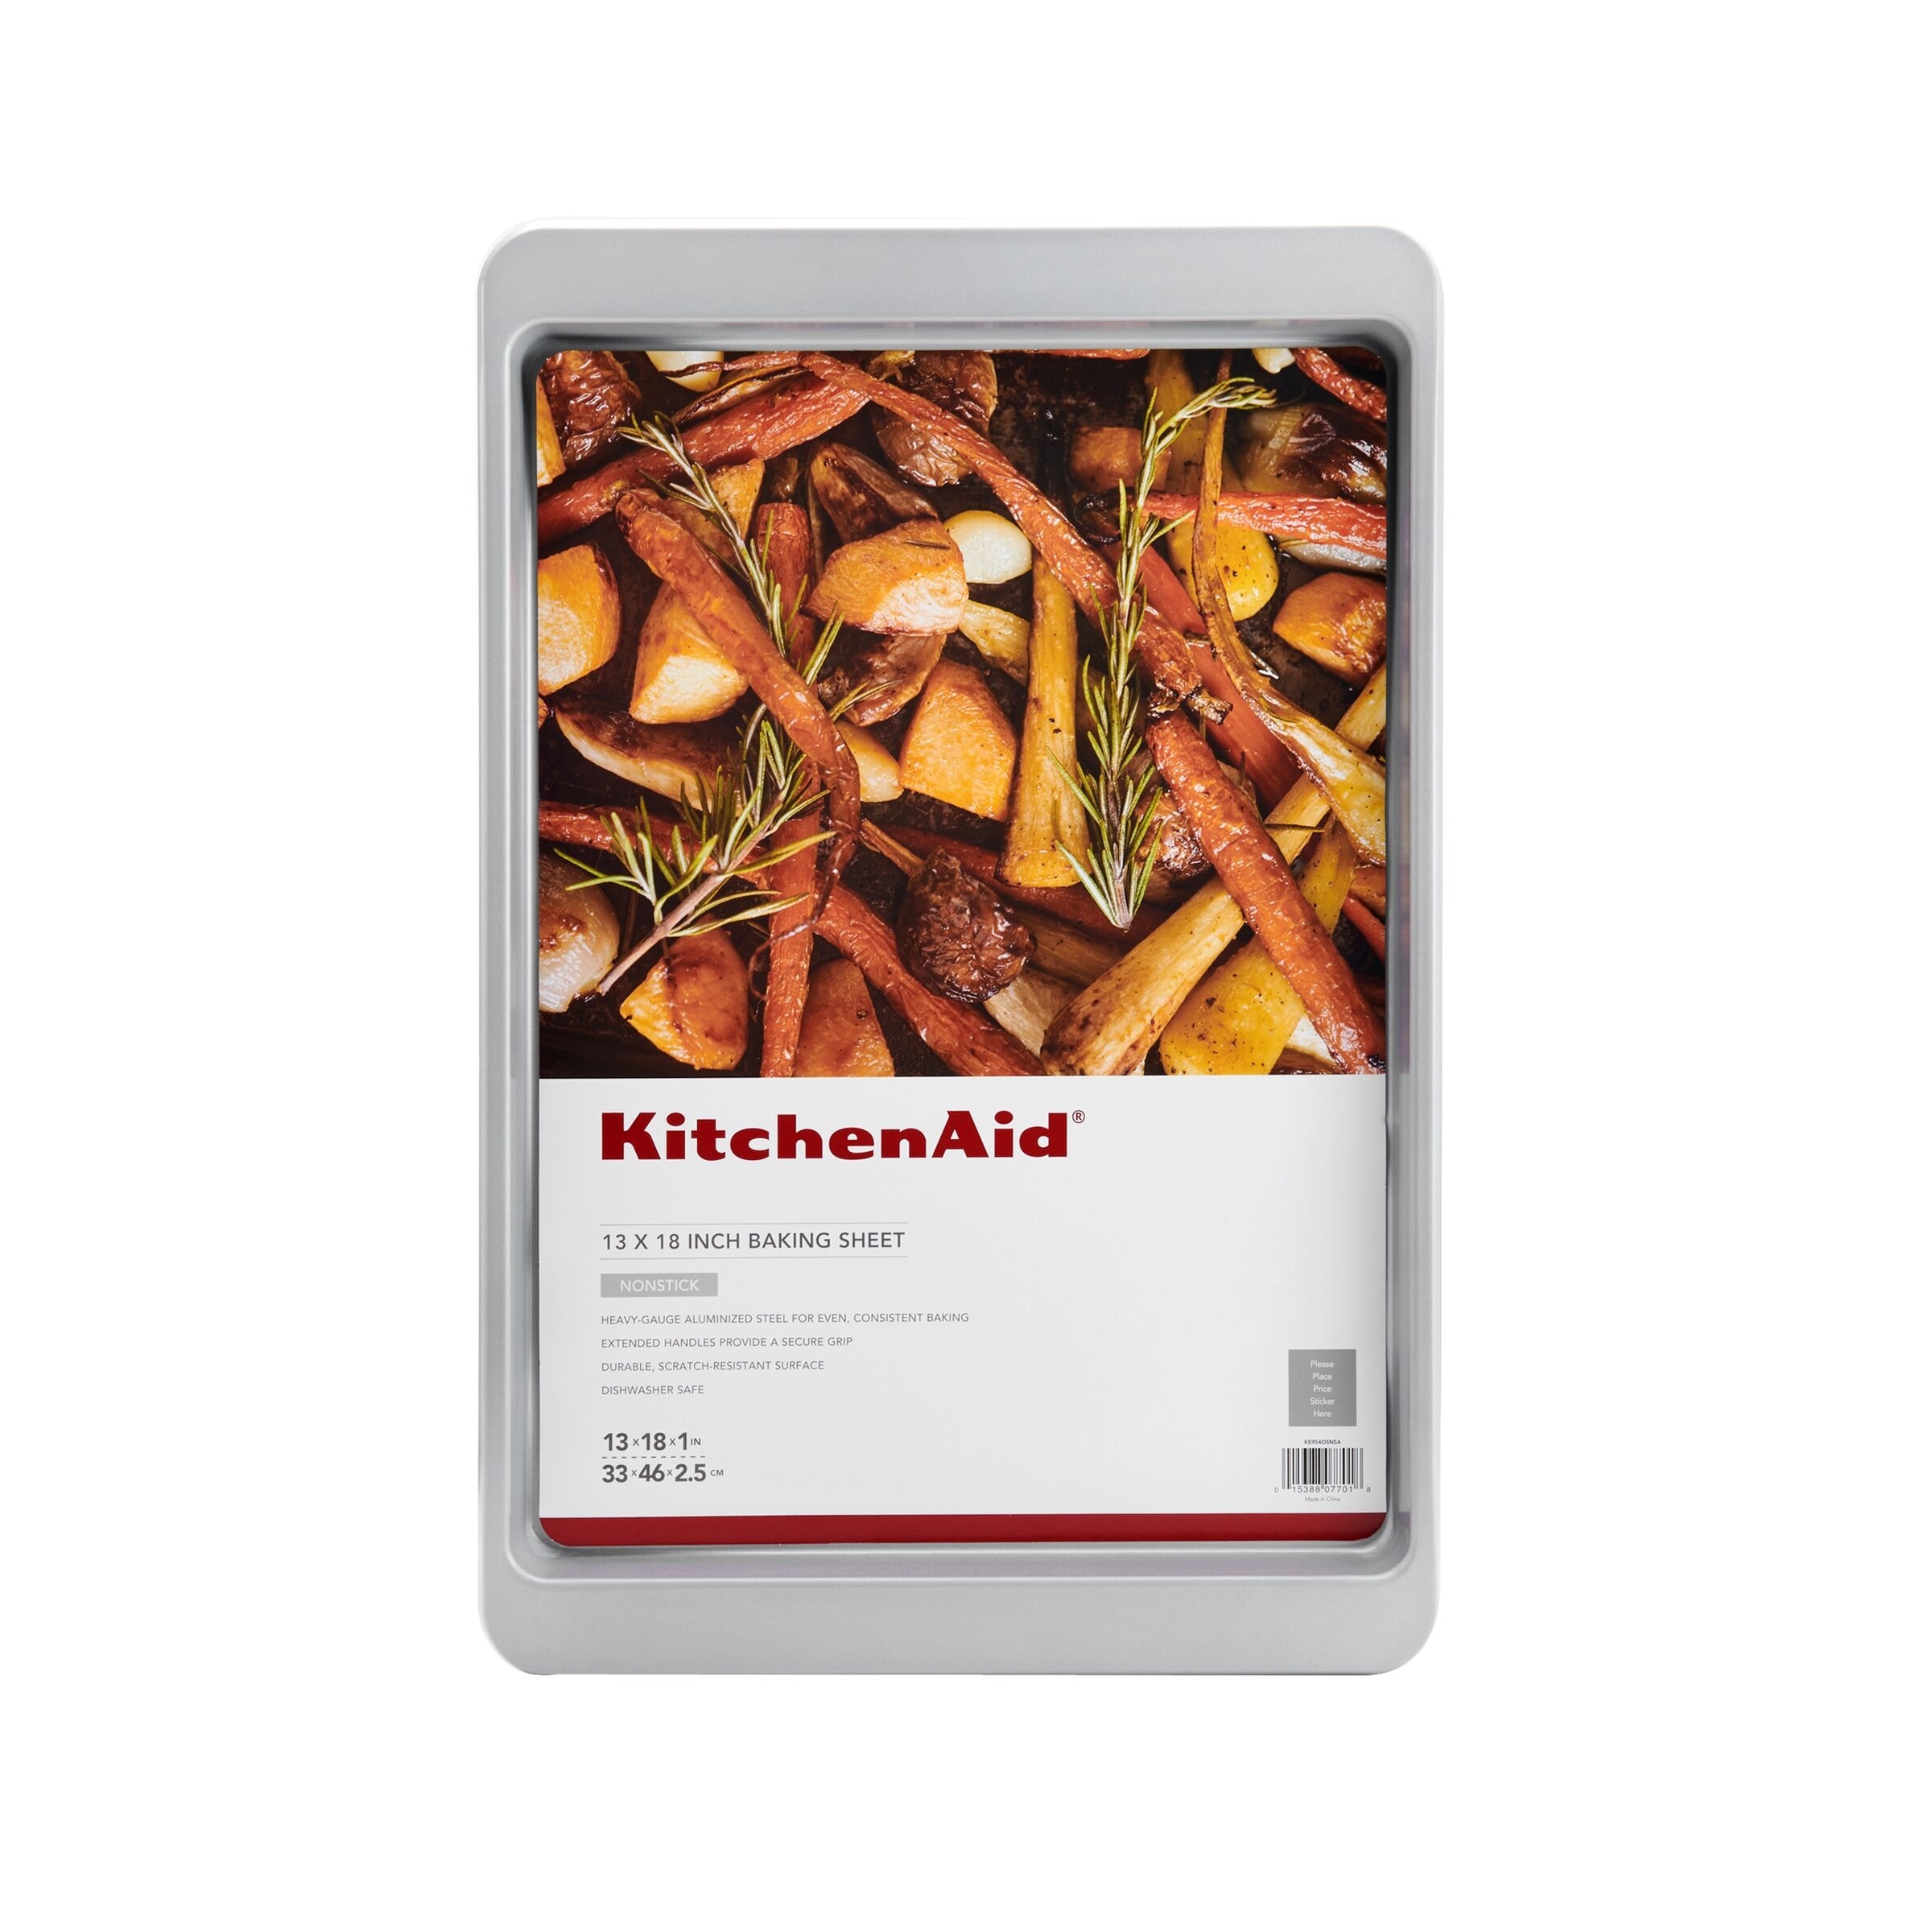 https://ak1.ostkcdn.com/images/products/is/images/direct/8b74eb6e36e79d3e223bbd6691b0fbe3fb465ef0/KitchenAid-Nonstick-13x18-in-Baking-Sheet%2C-Silver.jpg